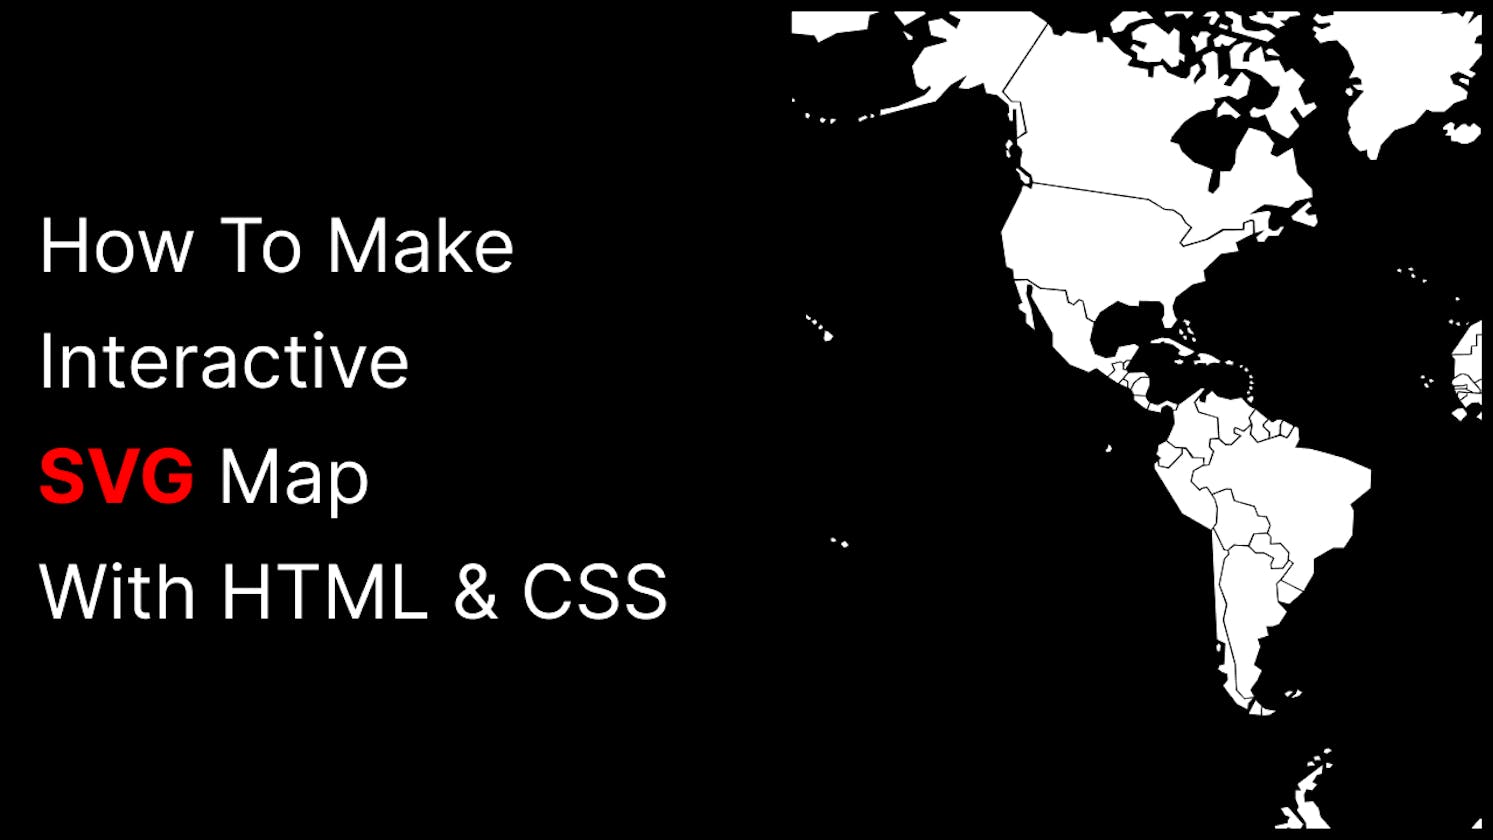 How To Make Interactive SVG Map With HTML & CSS